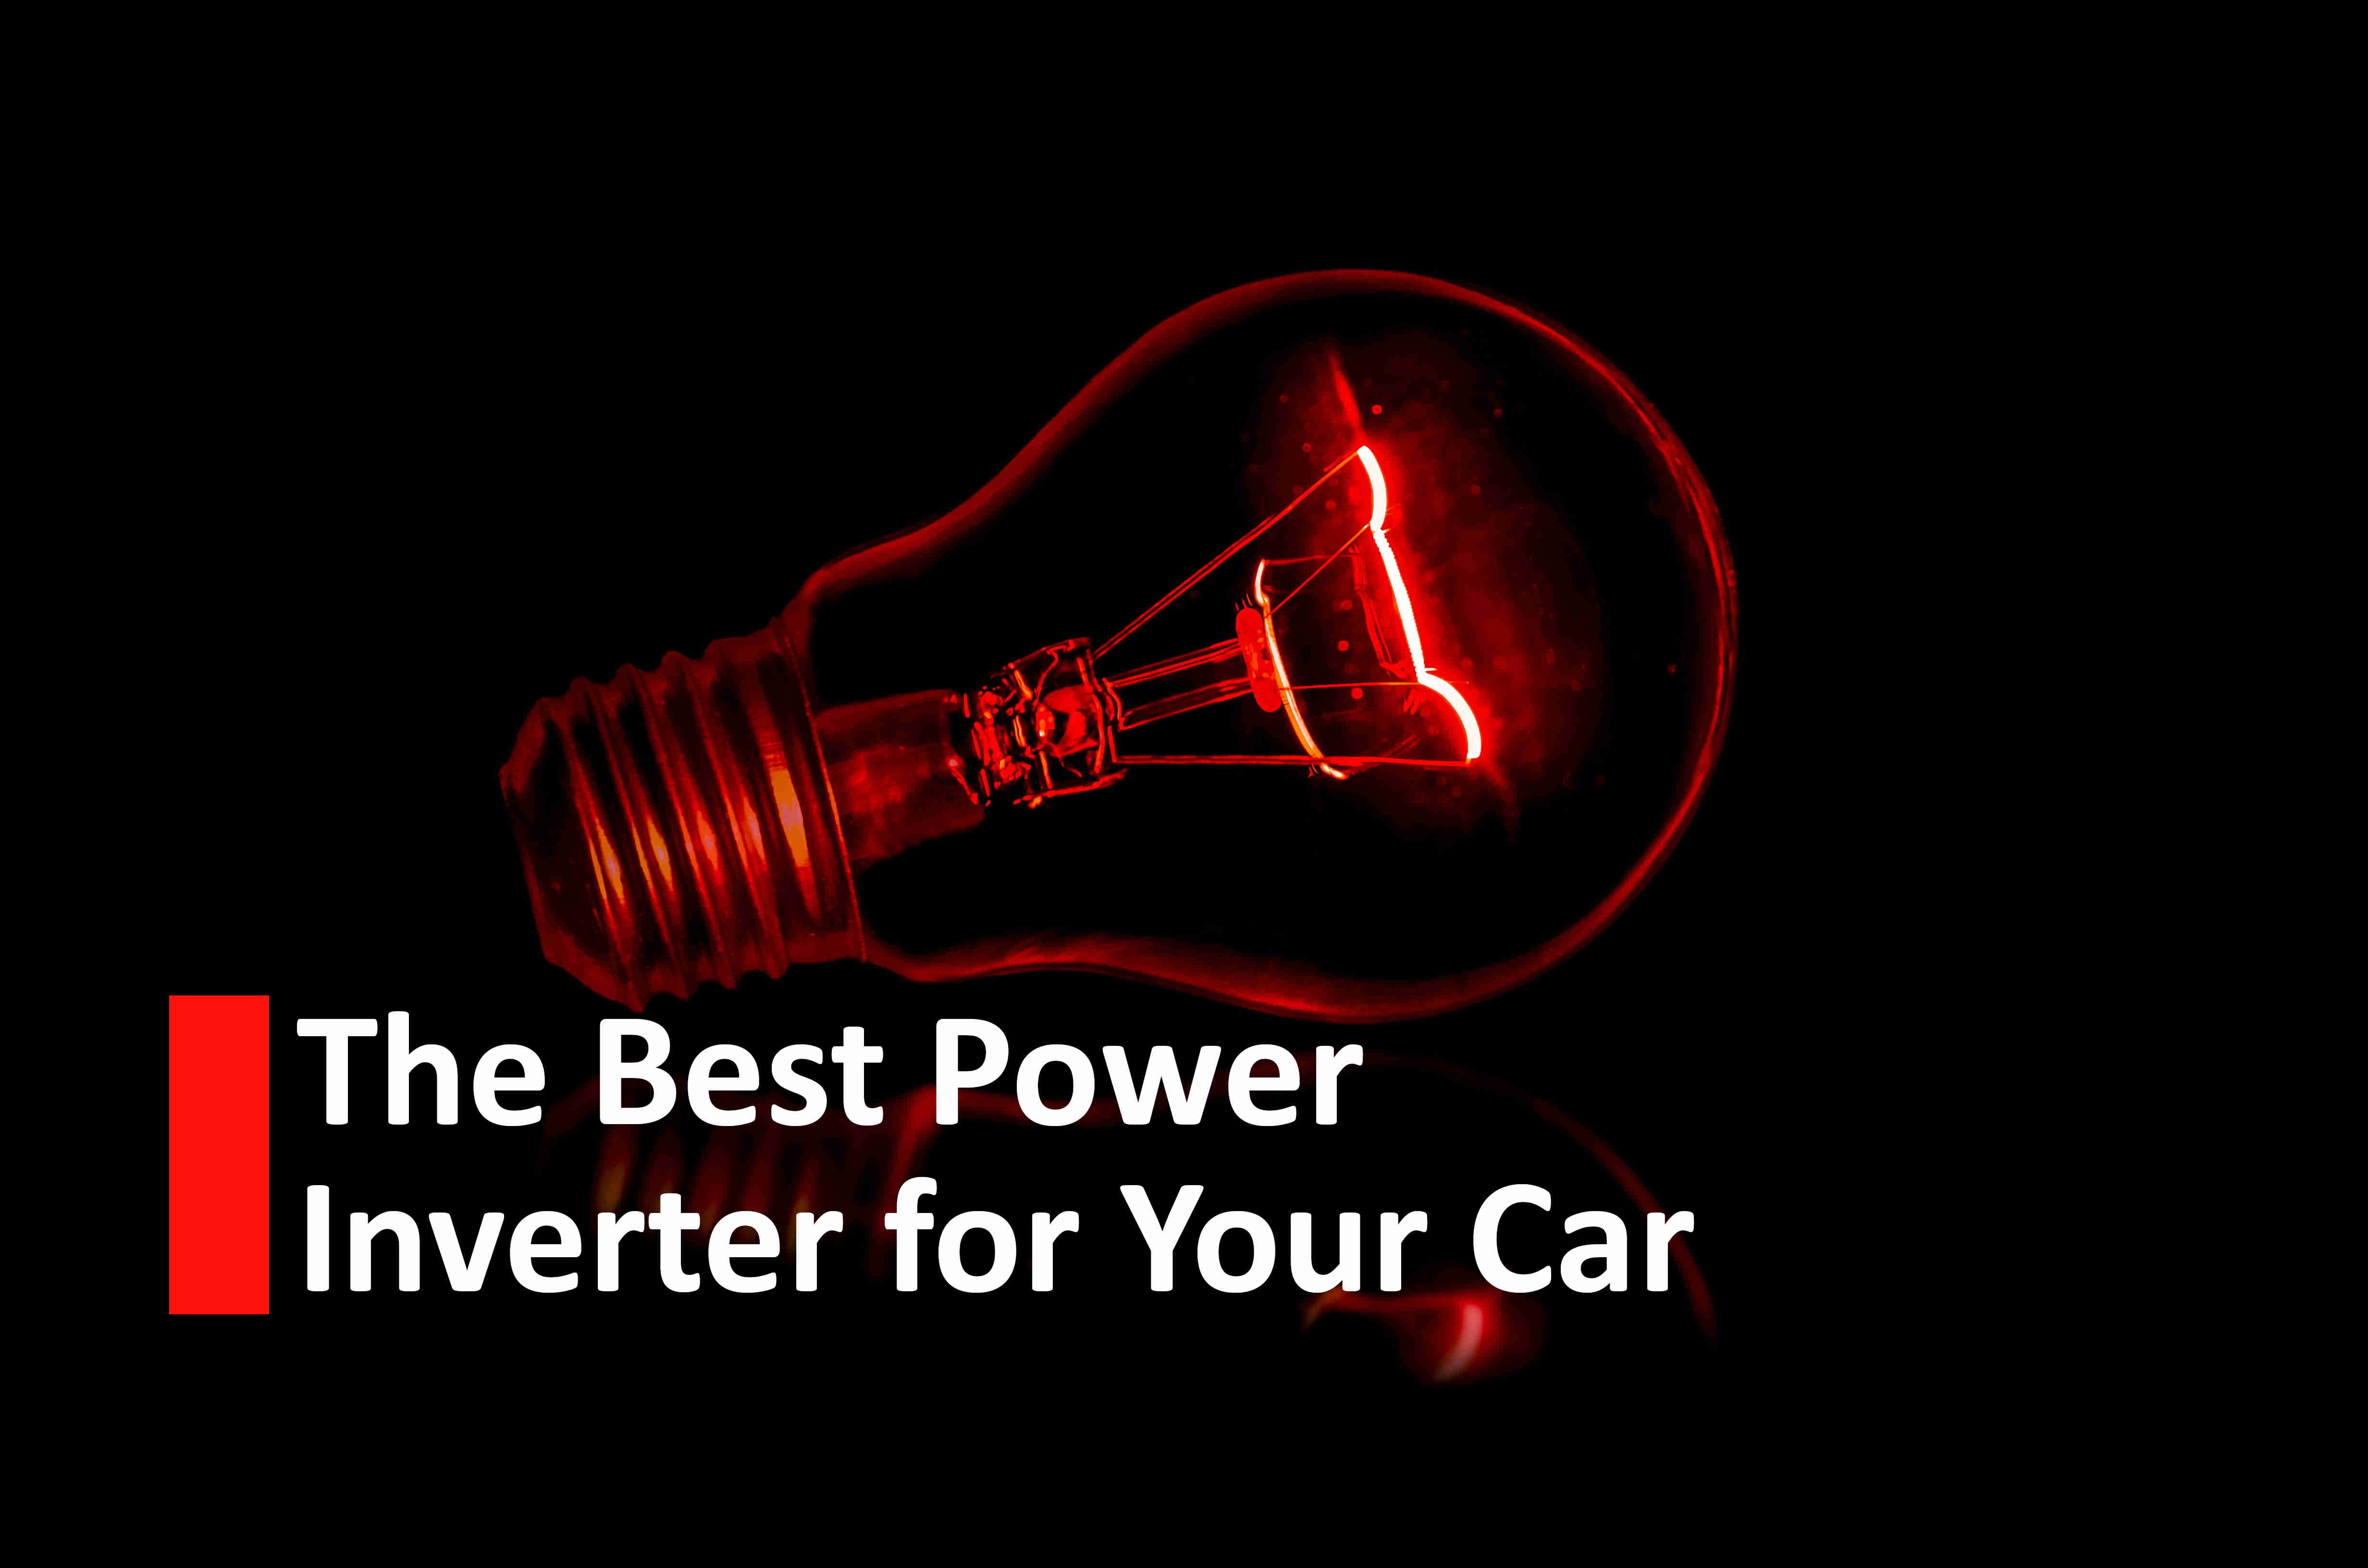 The Best Power Inverter for Your Car